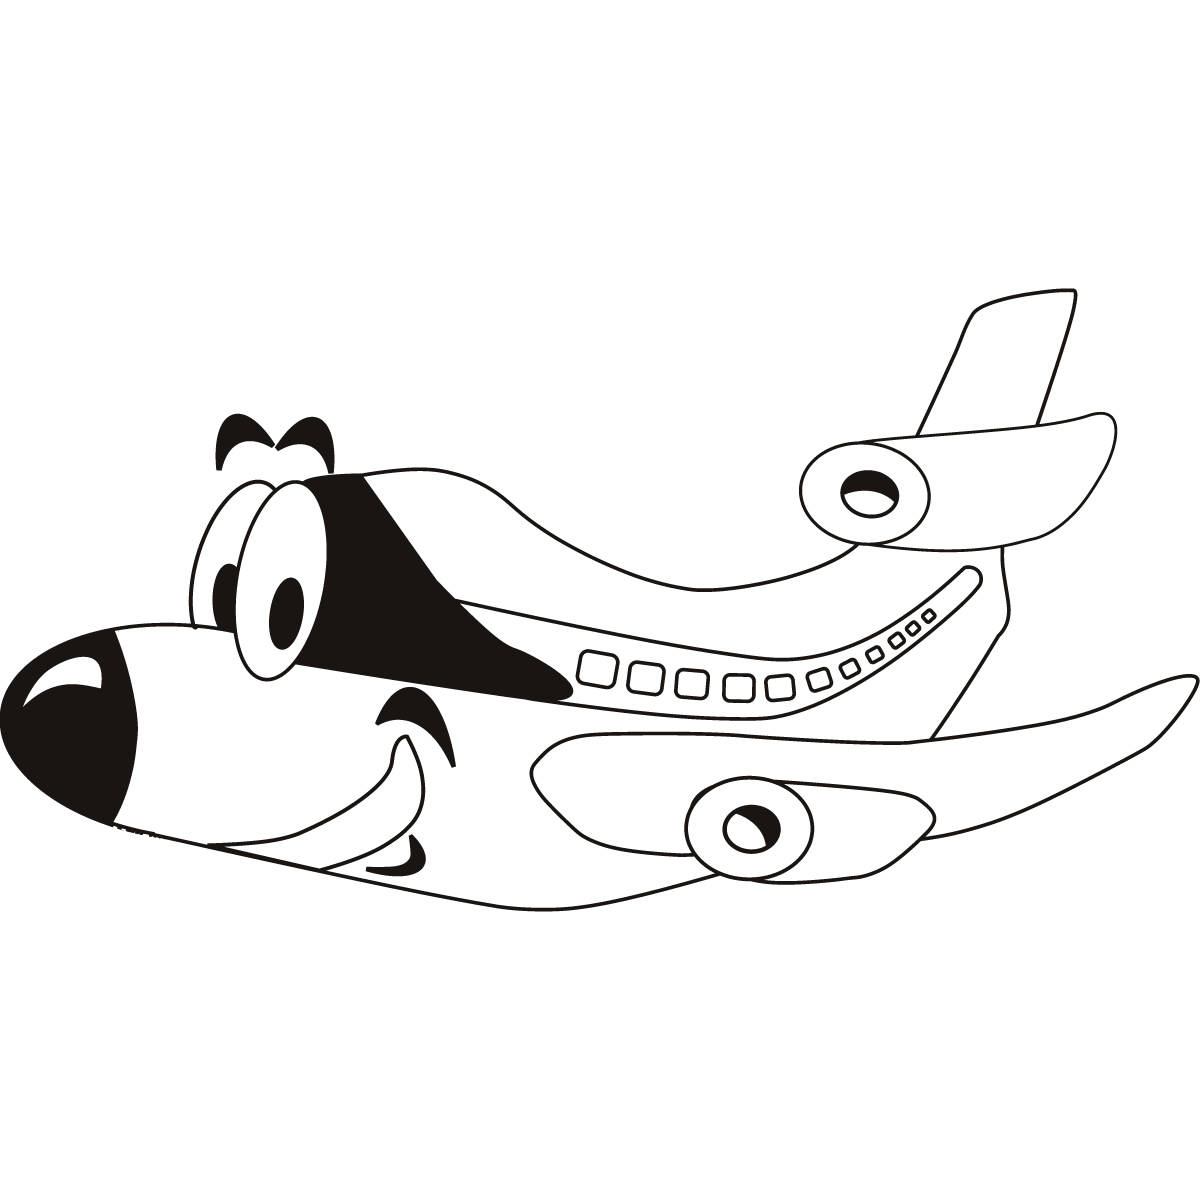 Free airplane coloring pages - Coloring Pages & Pictures - IMAGIXS